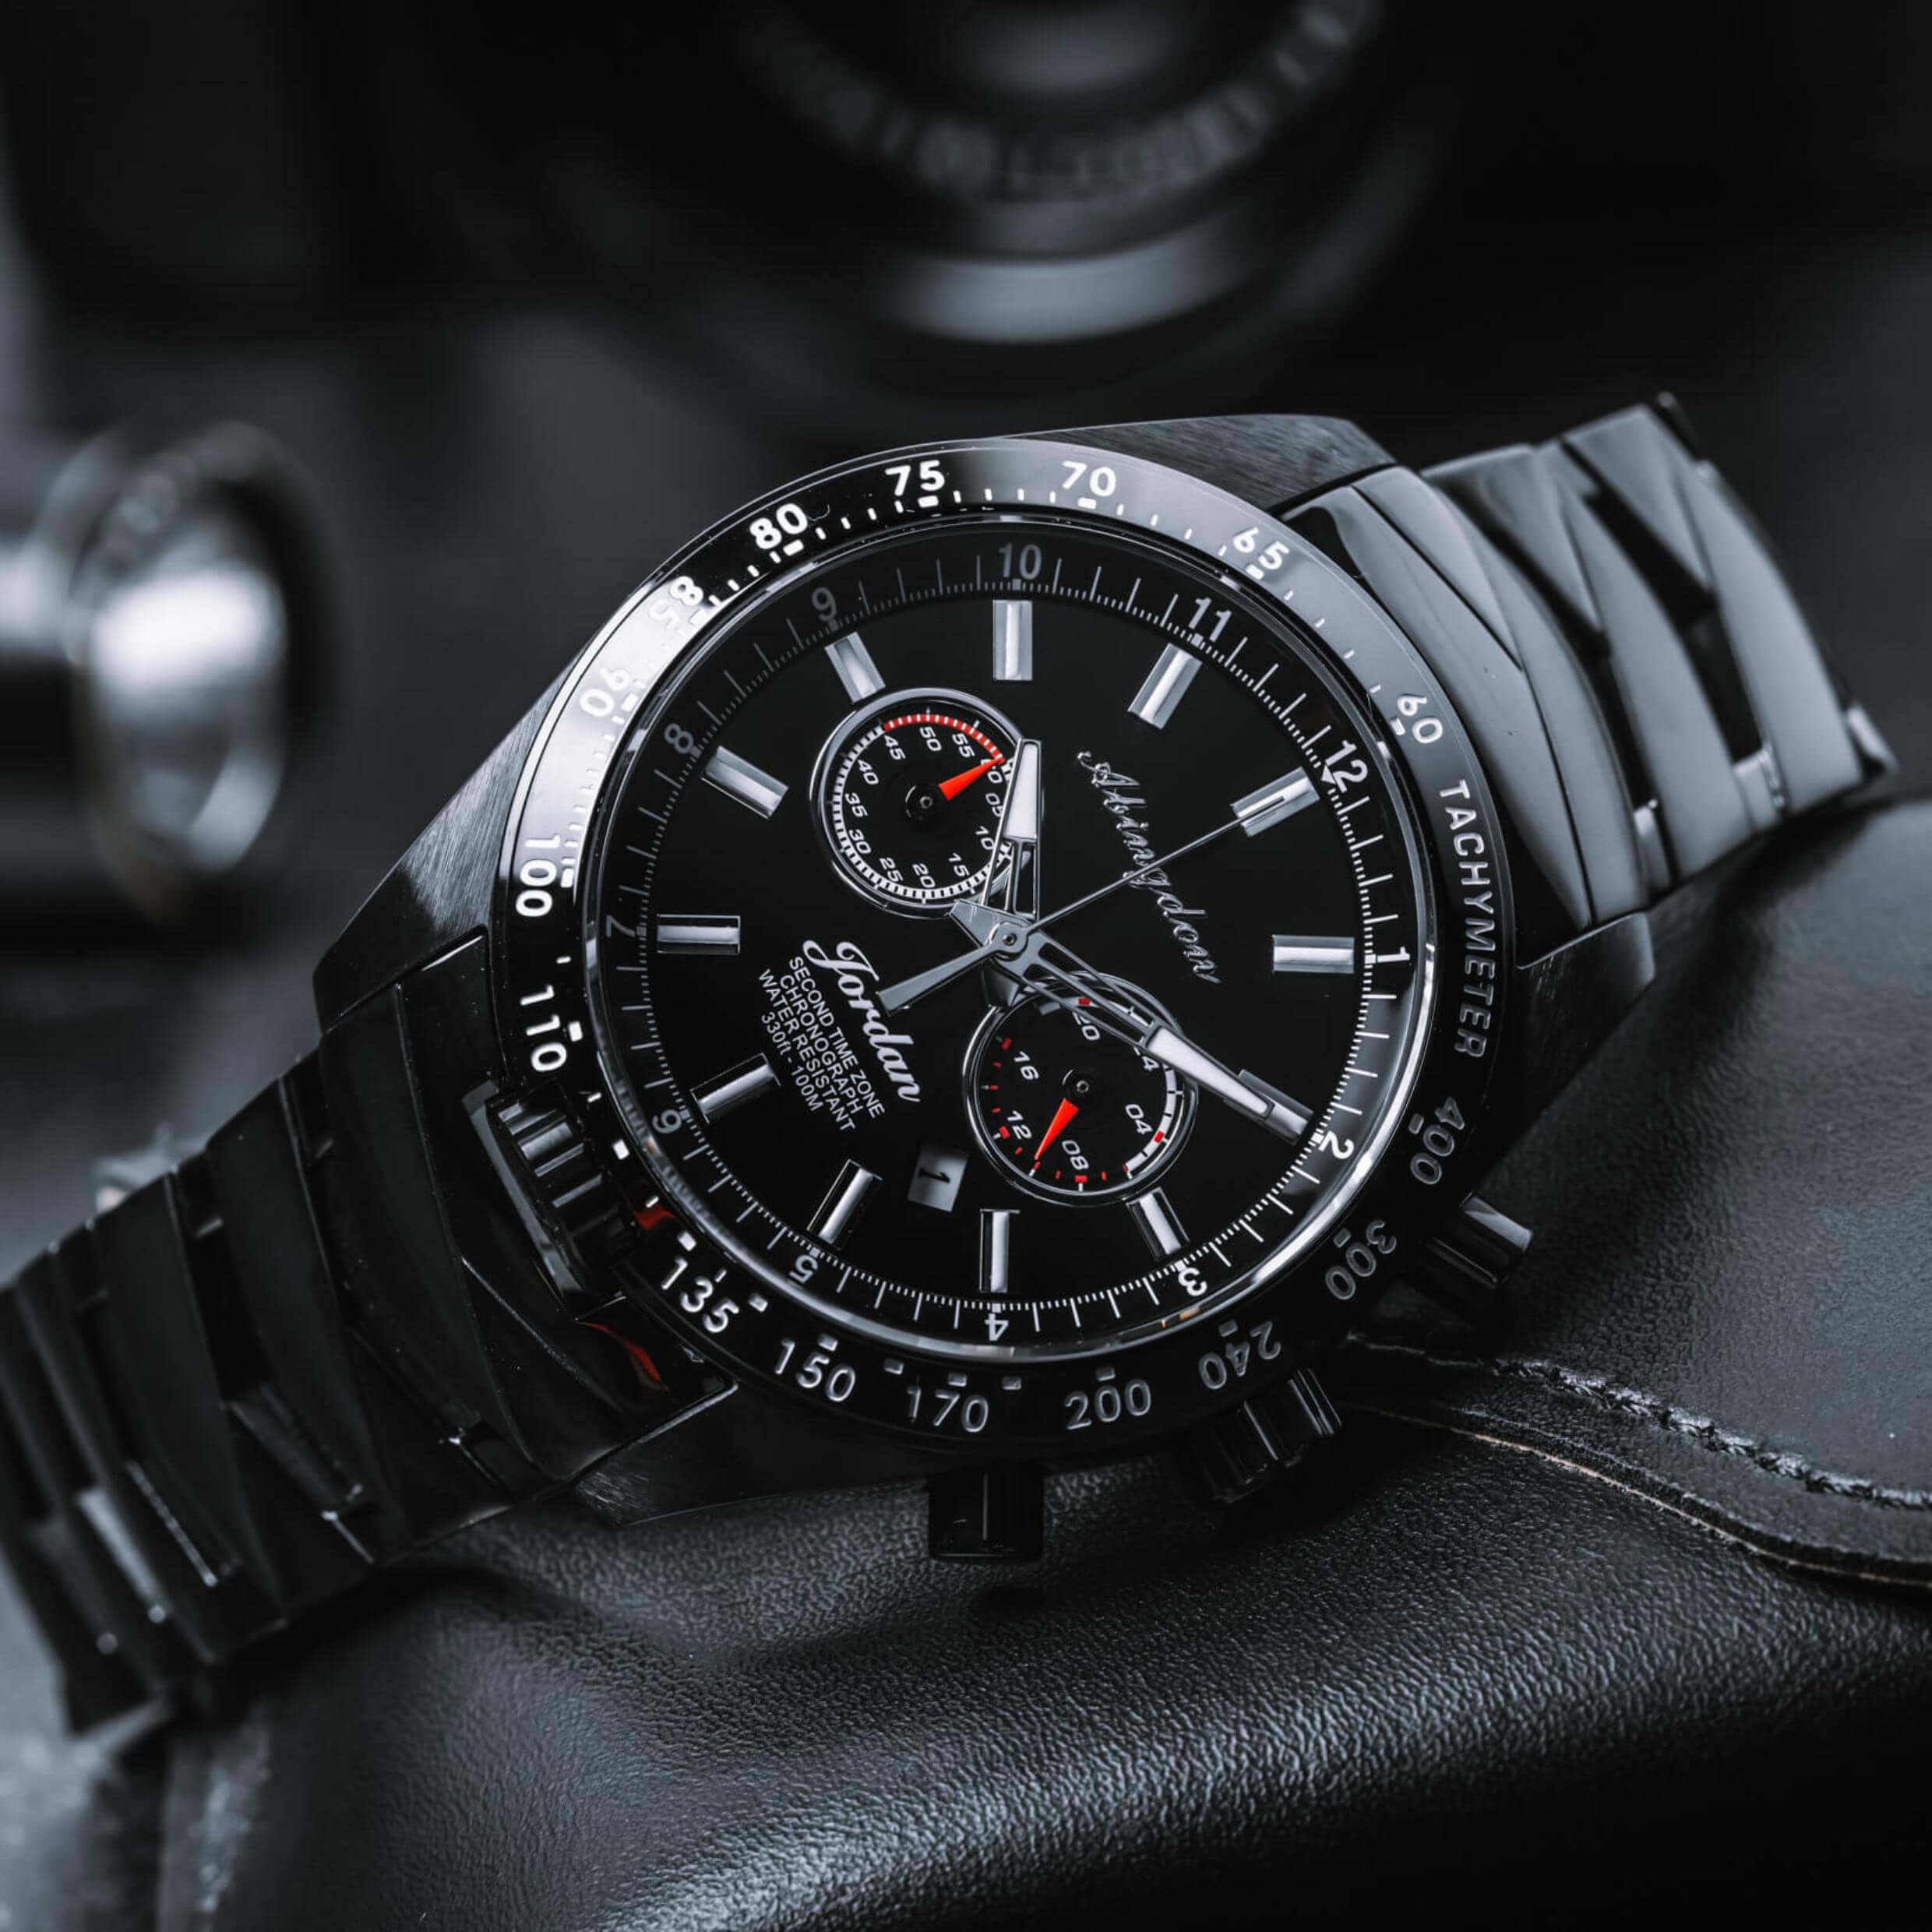 Abingdon Co. Image displays Jordan watch on a black background. black chronograph watch with tachymeter, military time, date, and glow in the dark markings. Automotive unisex style watch with red accent markings on the black sunray dial. Racing watch for men and women.